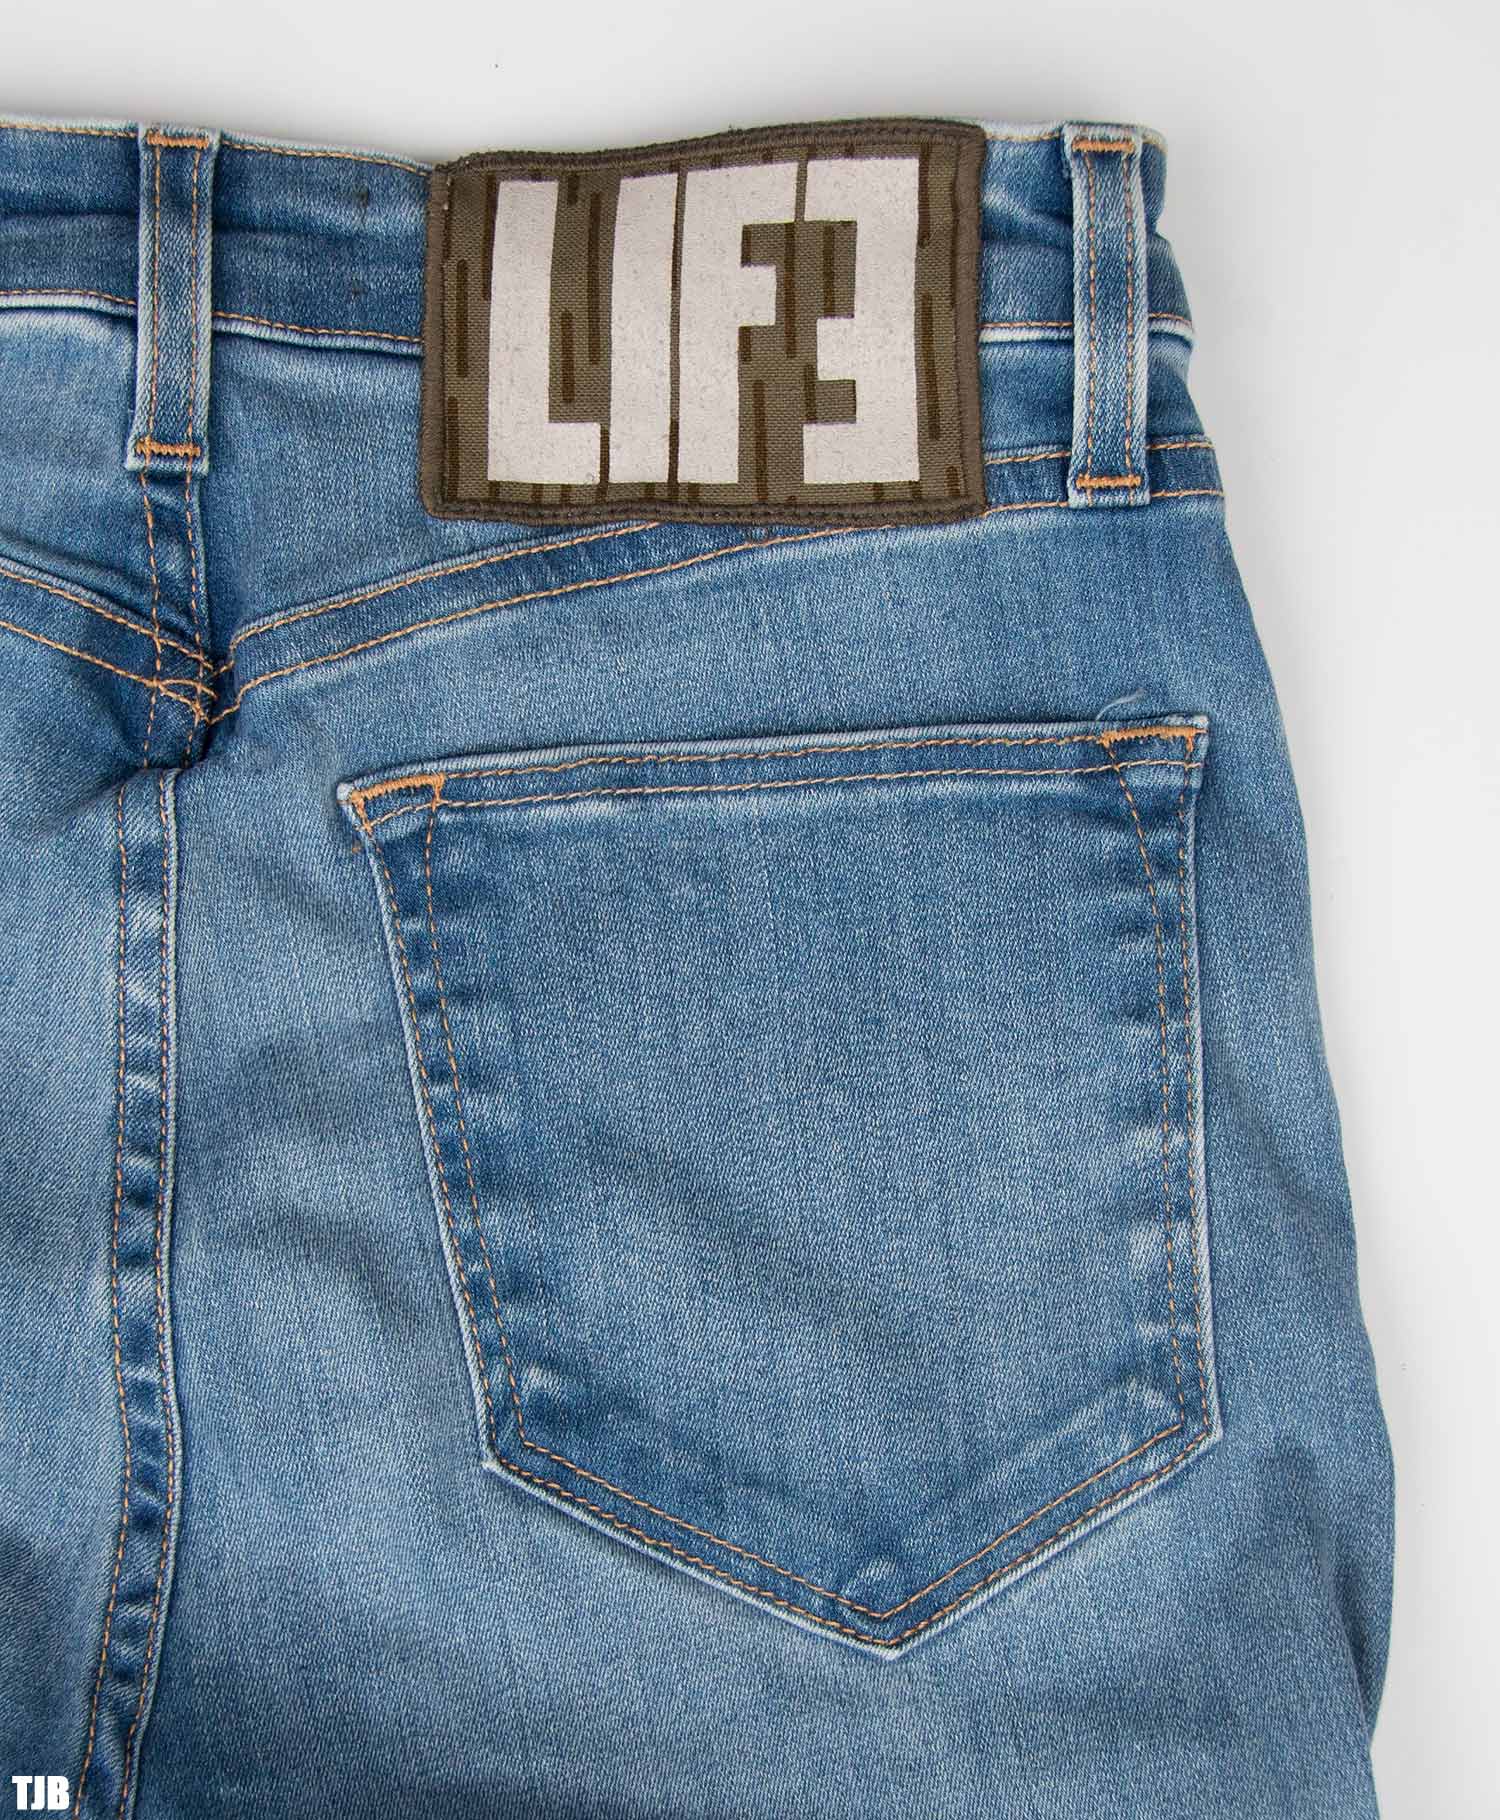 Life After Death Denim Truth High Rise Skinny Jeans Review – THE JEANS BLOG